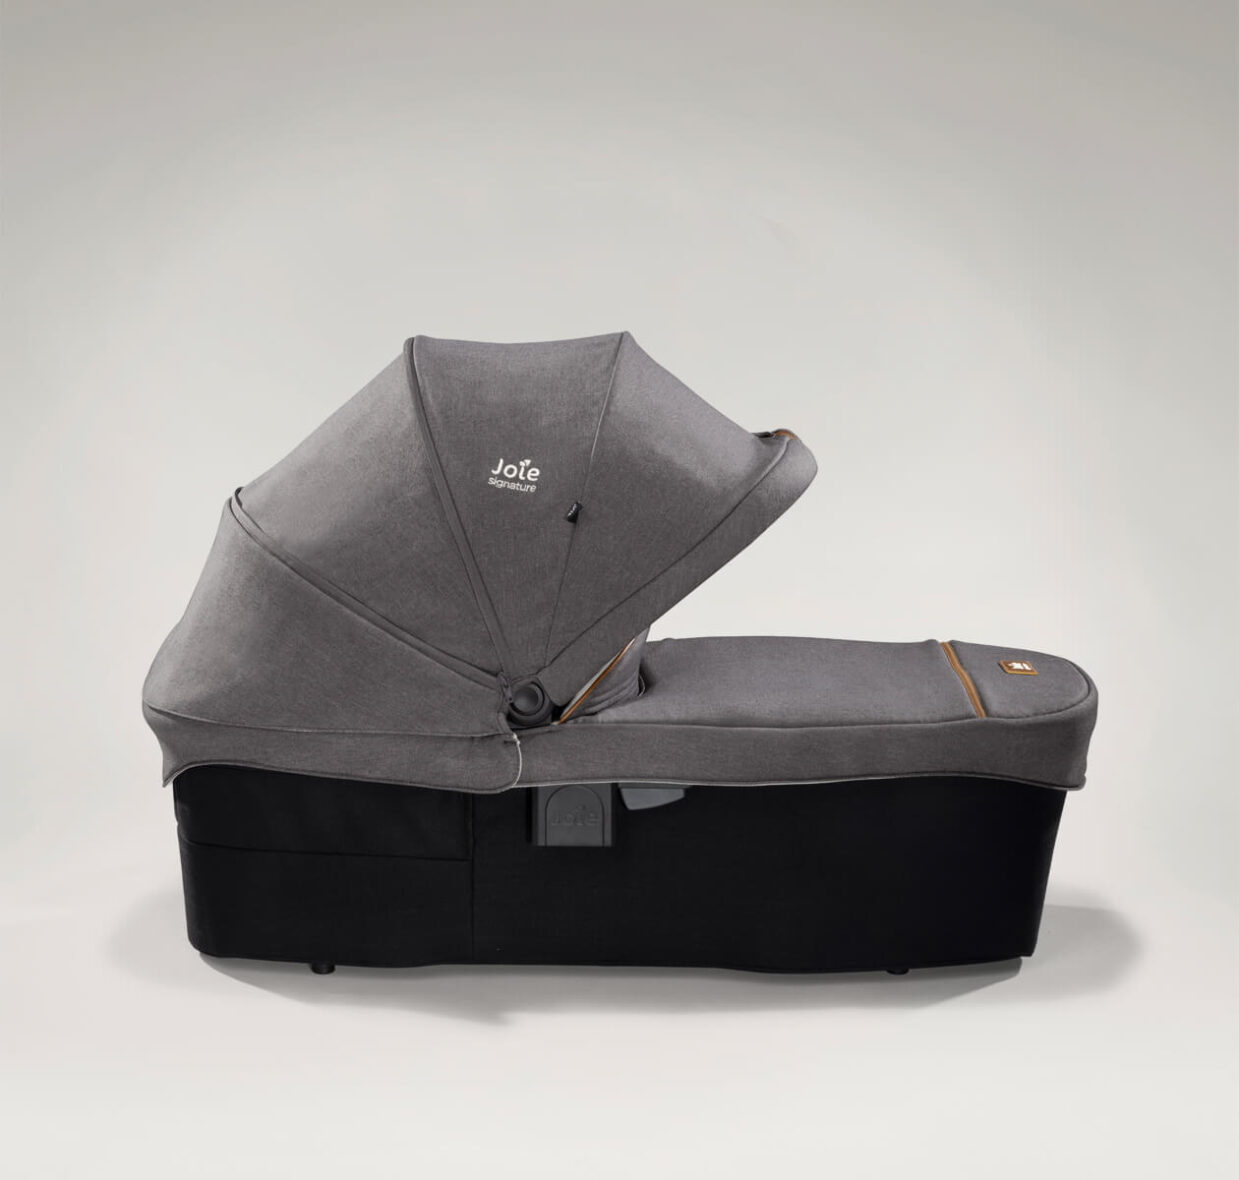 p3-joie-signature-carrycot-ramblexl-carbon-right-profile-extended-canopy